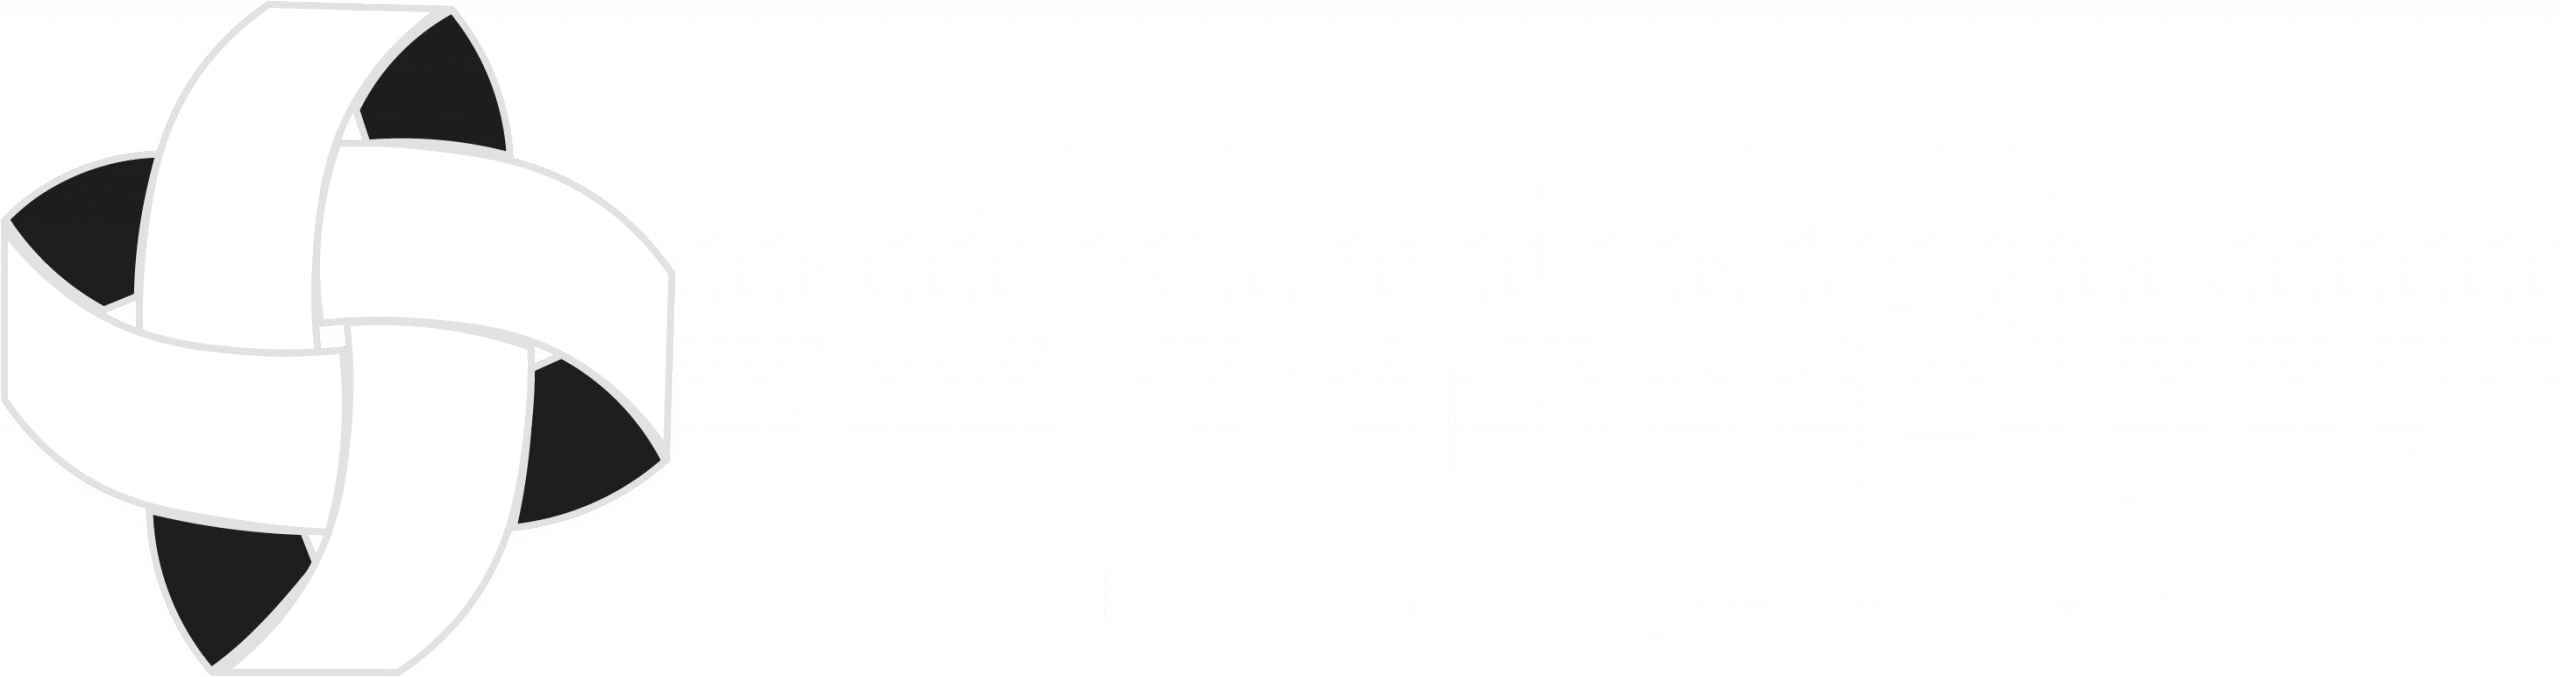 Platinum Creditplus Lending Corp.4 Ways to Make the Most of Your Seaman’s Loan